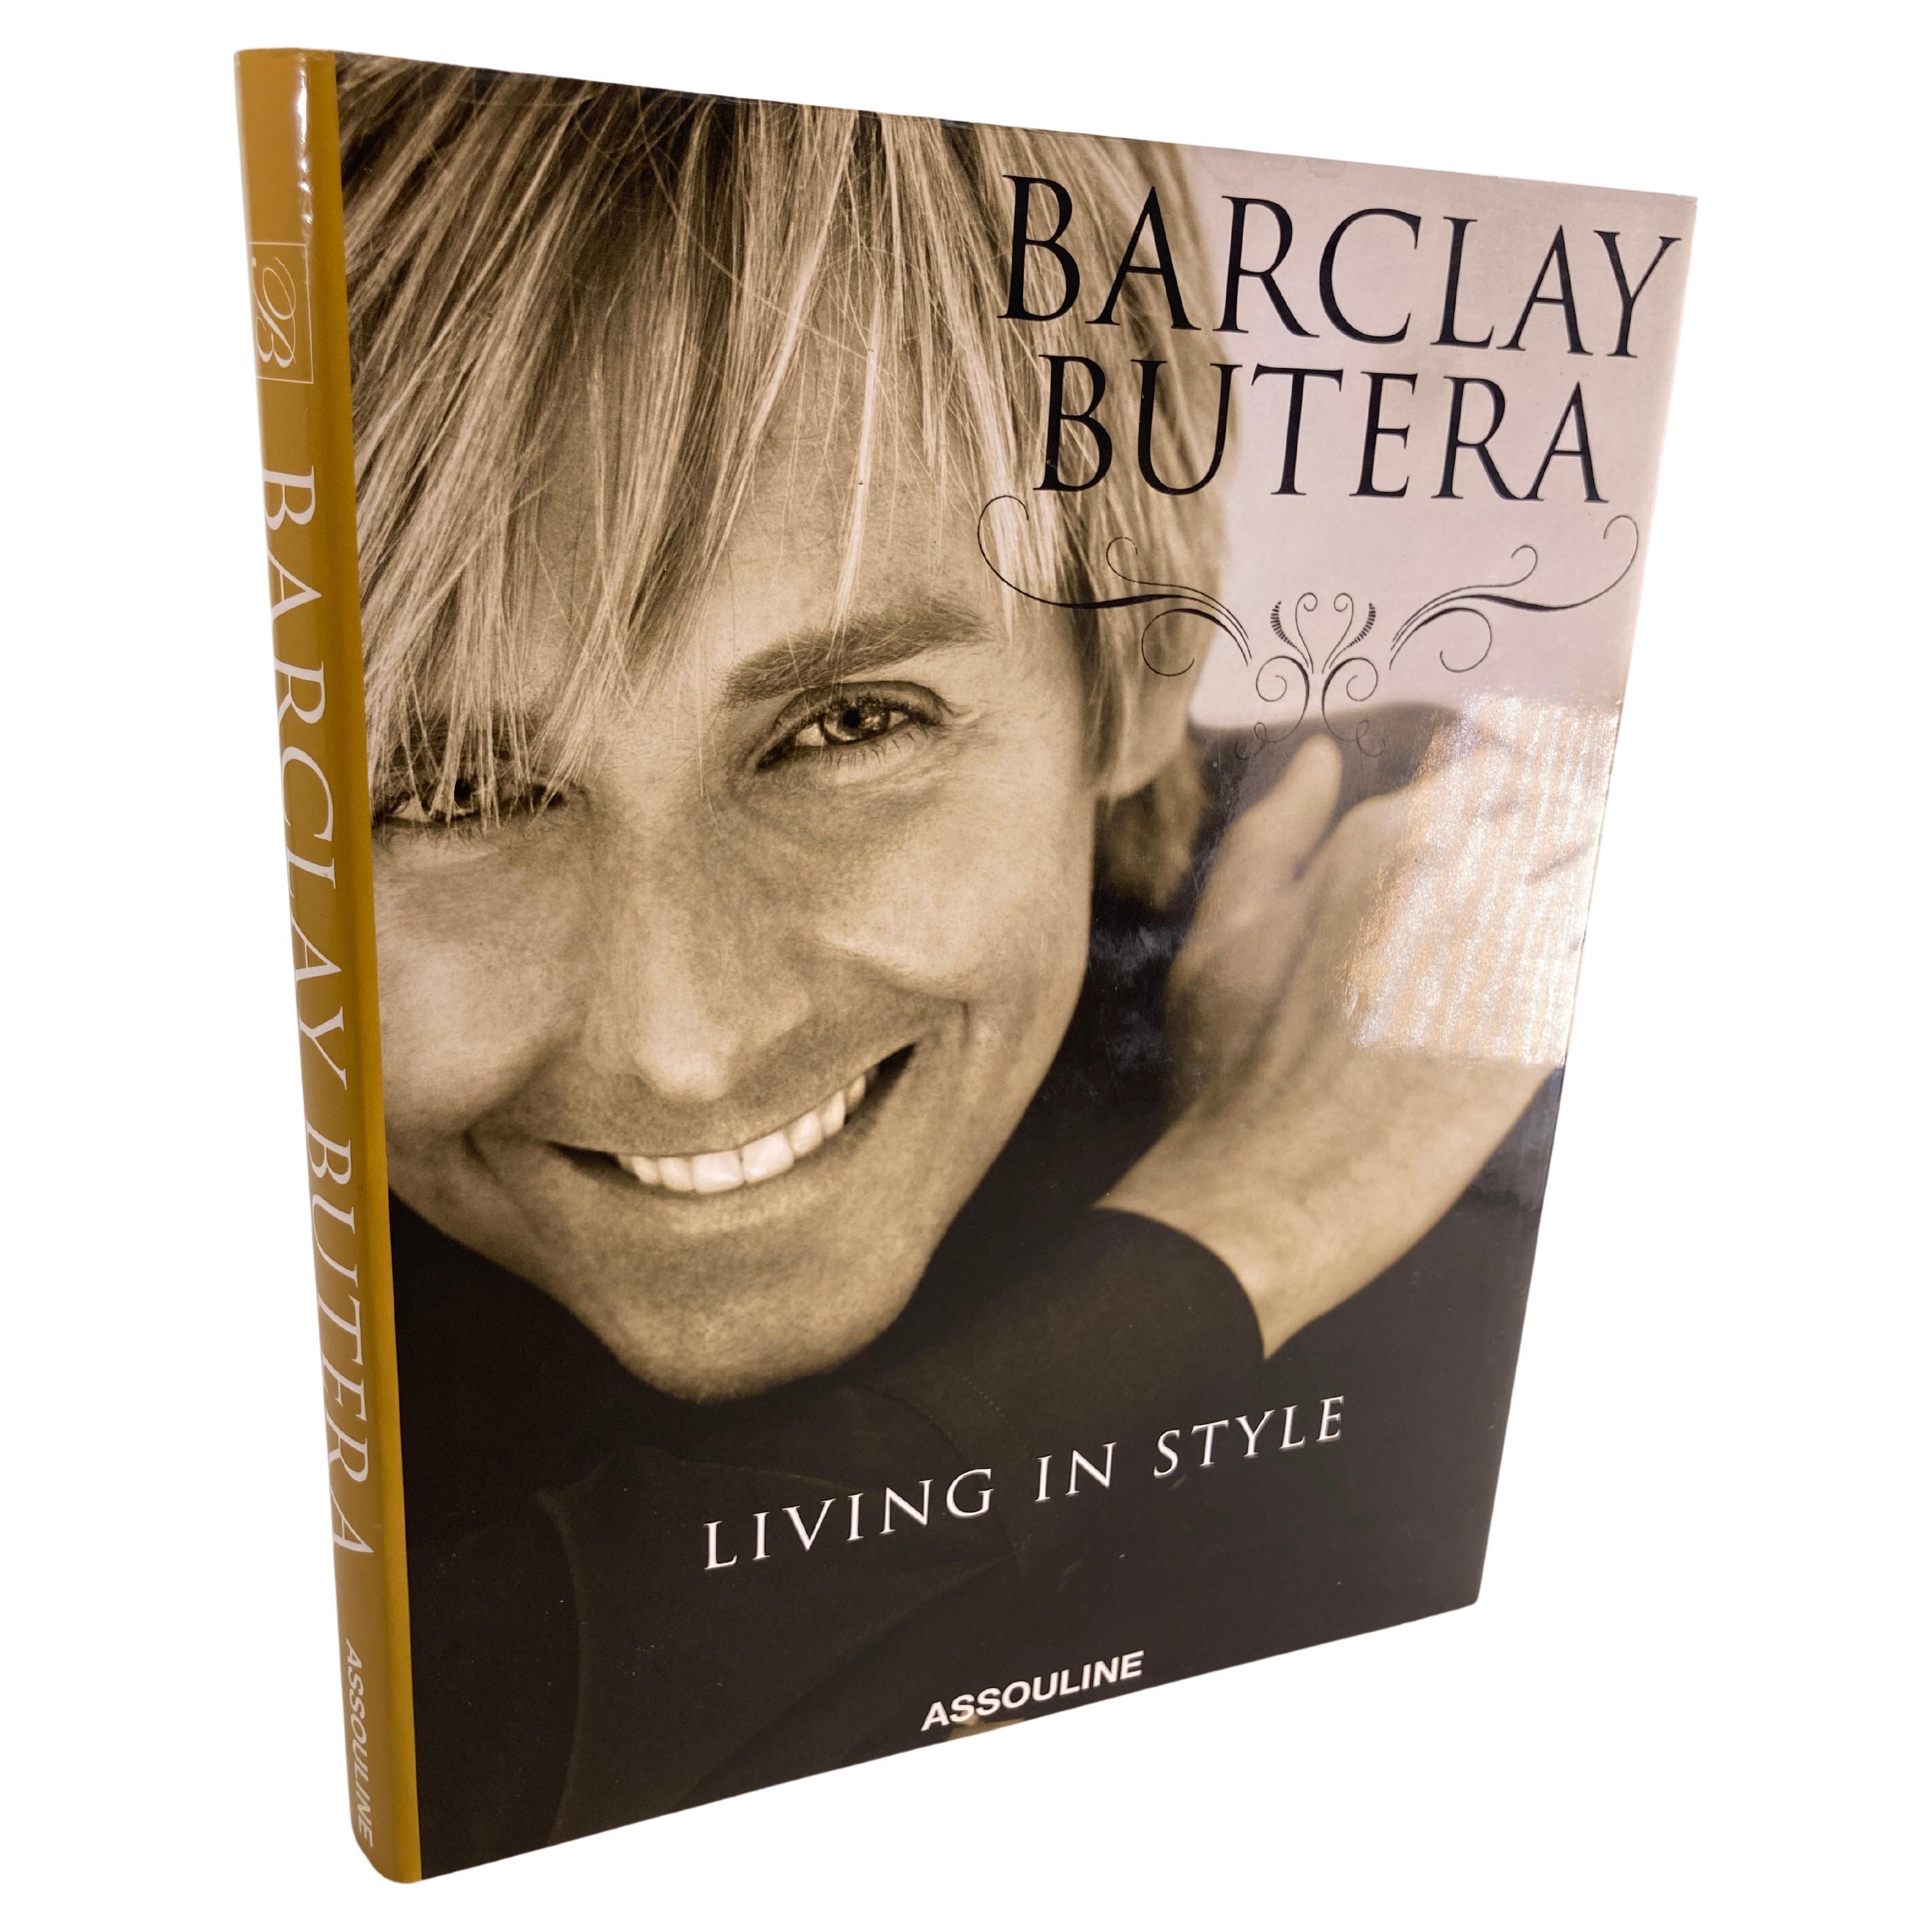 Barclay Butera "Living in Style" Coffee Table Book For Sale